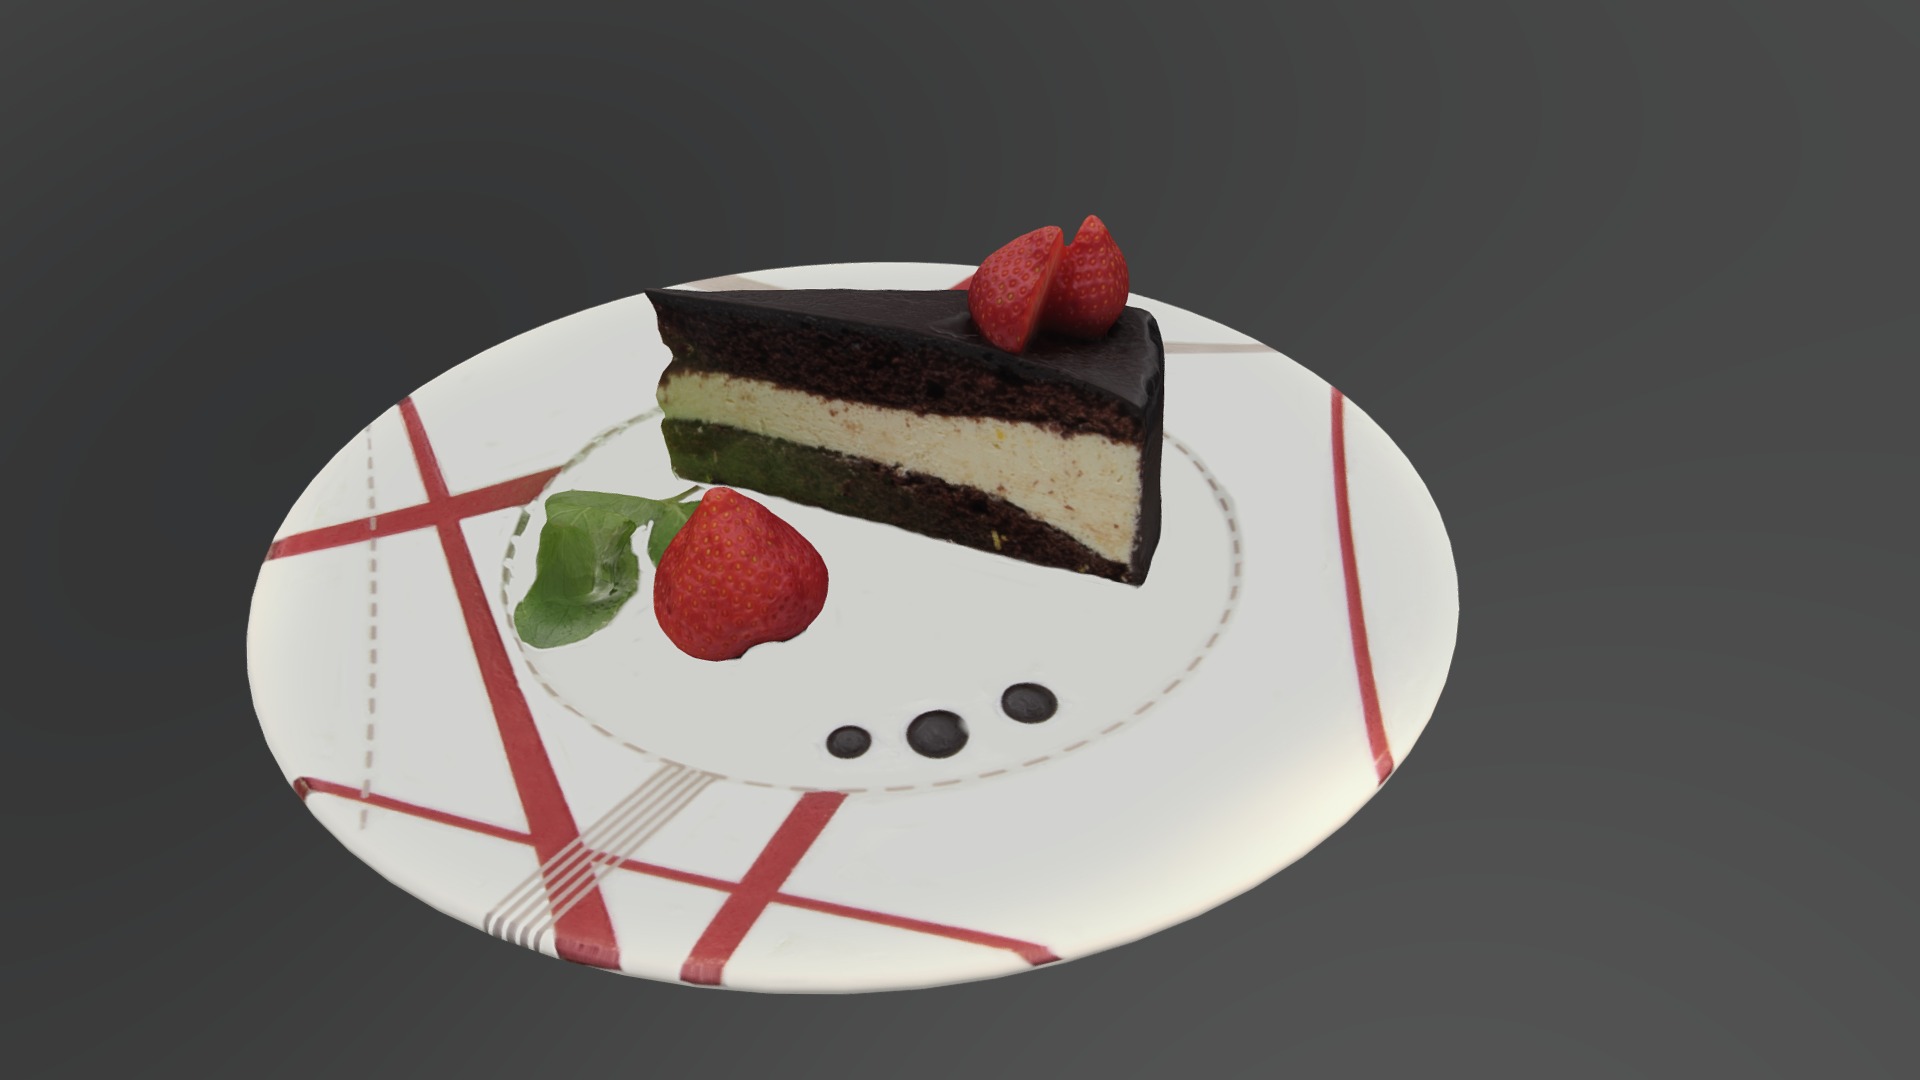 3D model 9Olimp - This is a 3D model of the 9Olimp. The 3D model is about a slice of cake with strawberries on top.